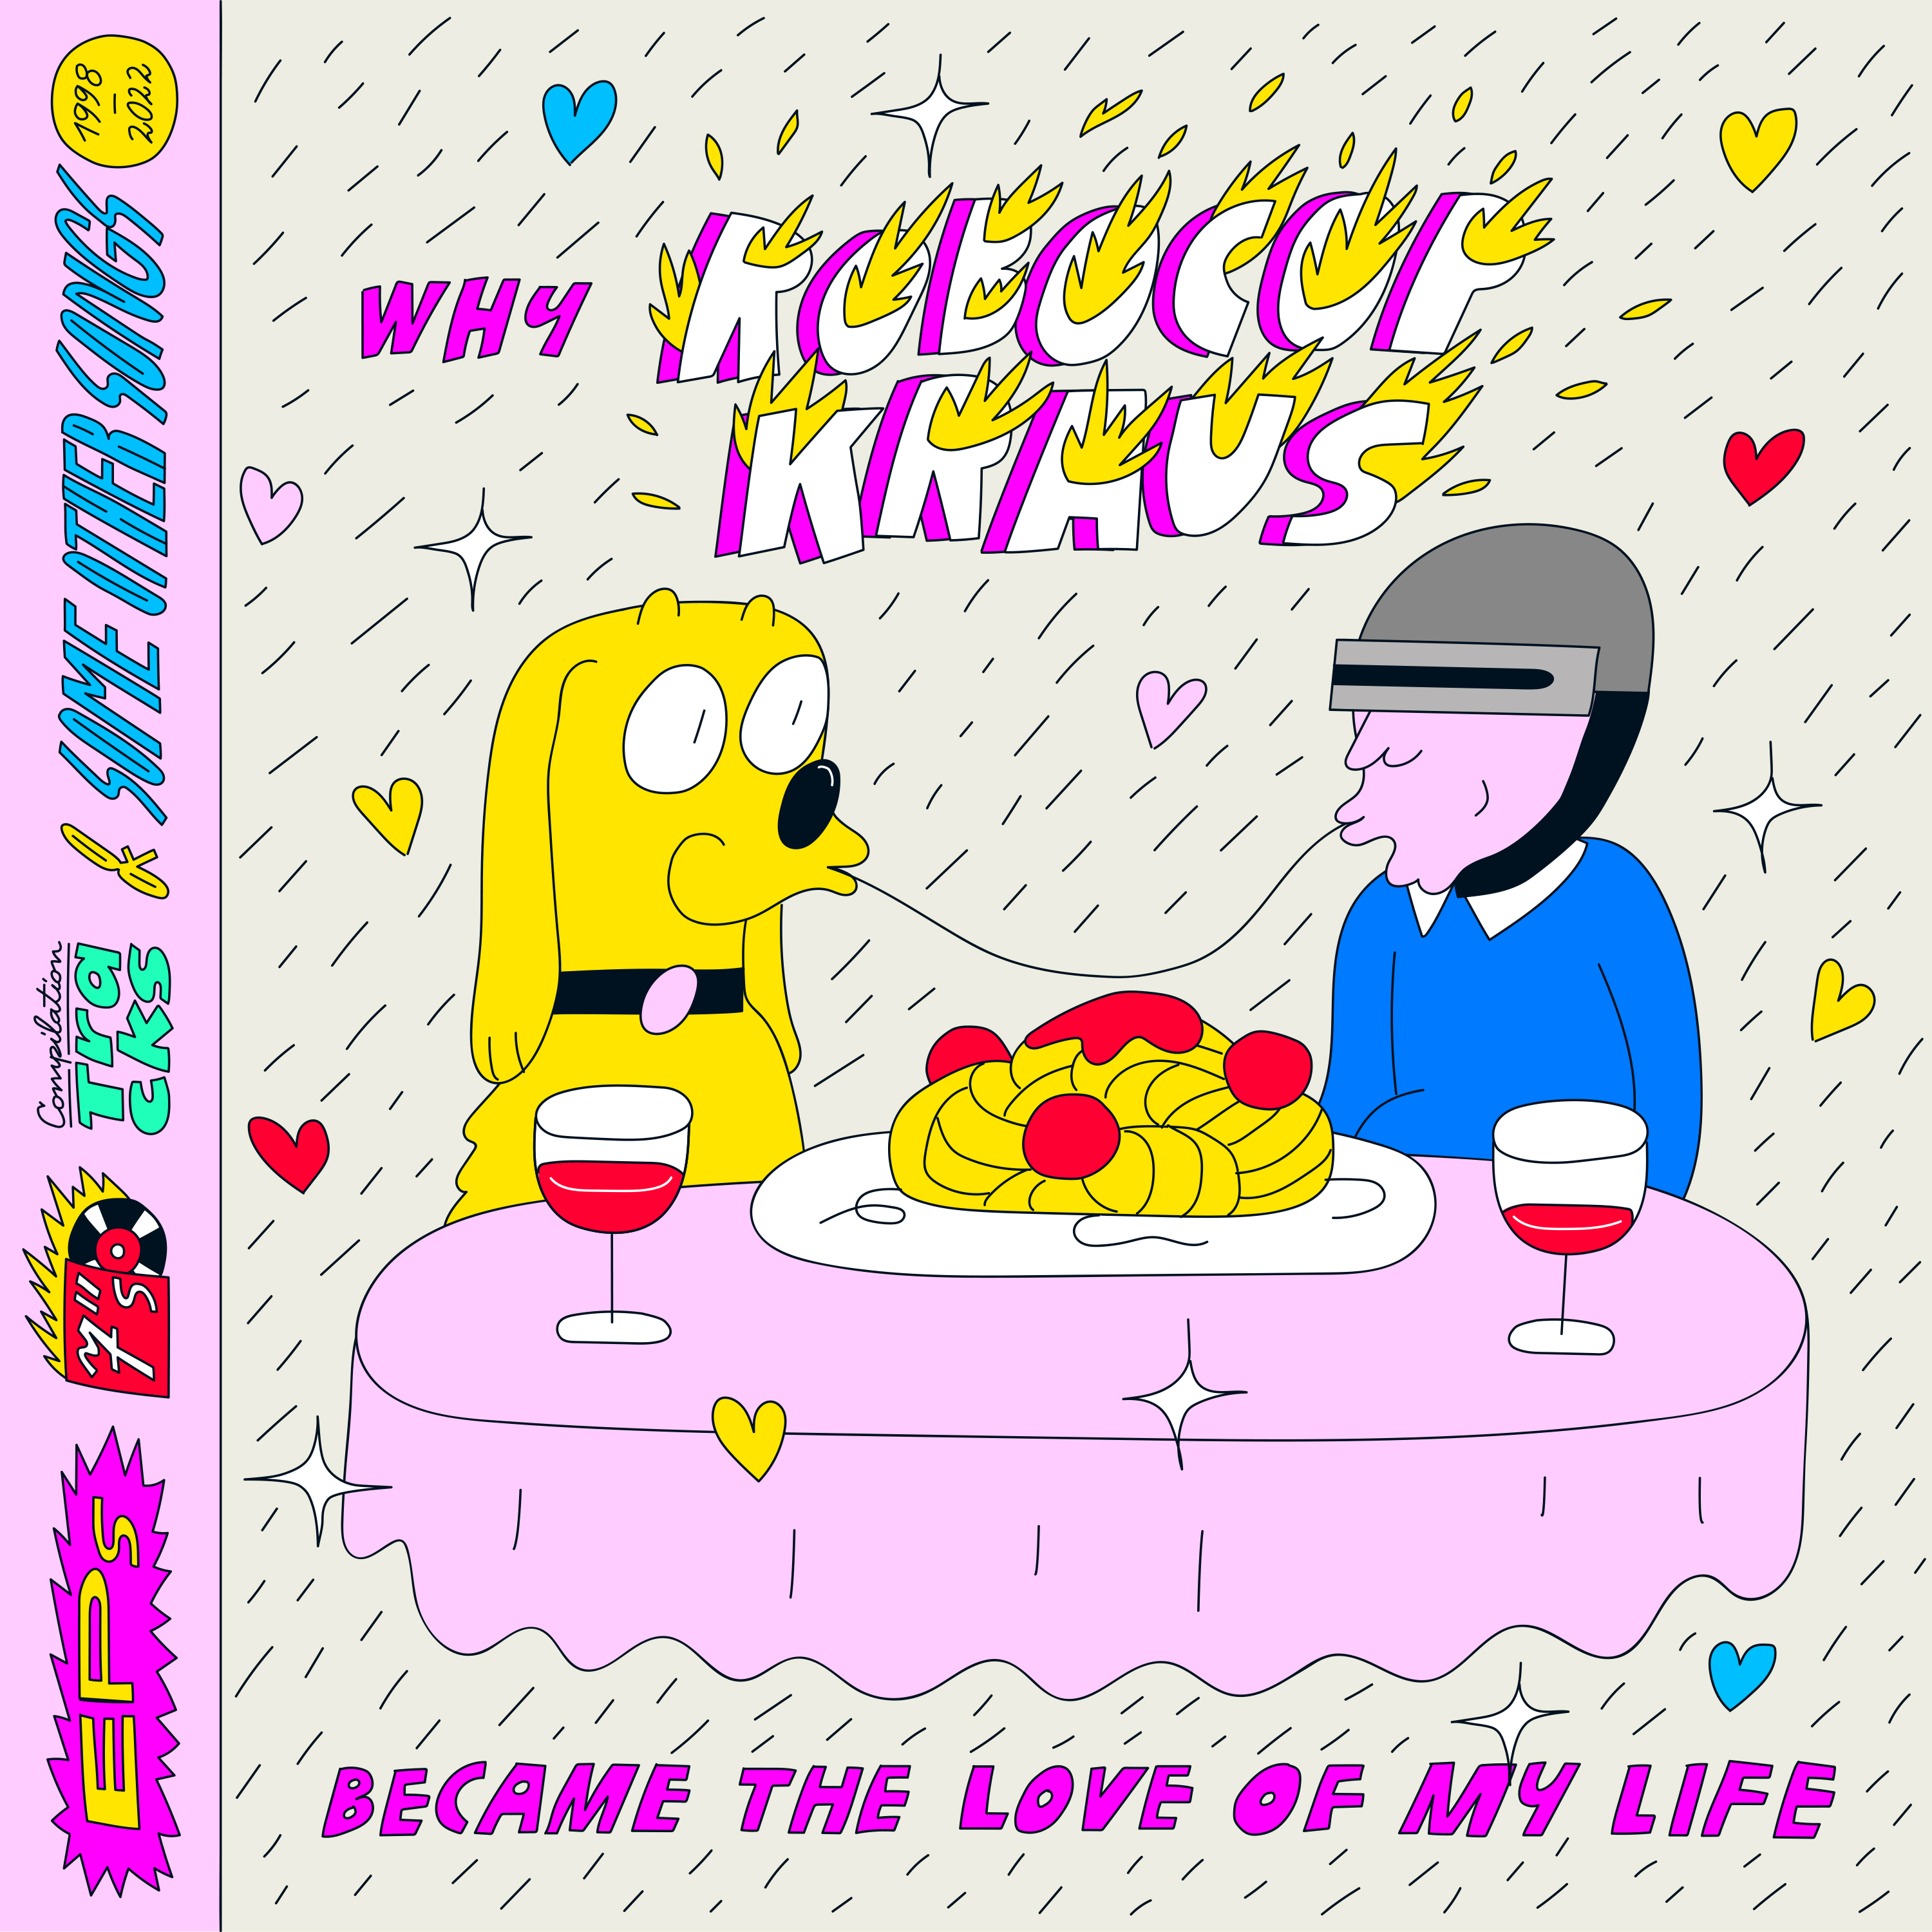 Robocop Kraus – Why Robocop Kraus became the love of my life